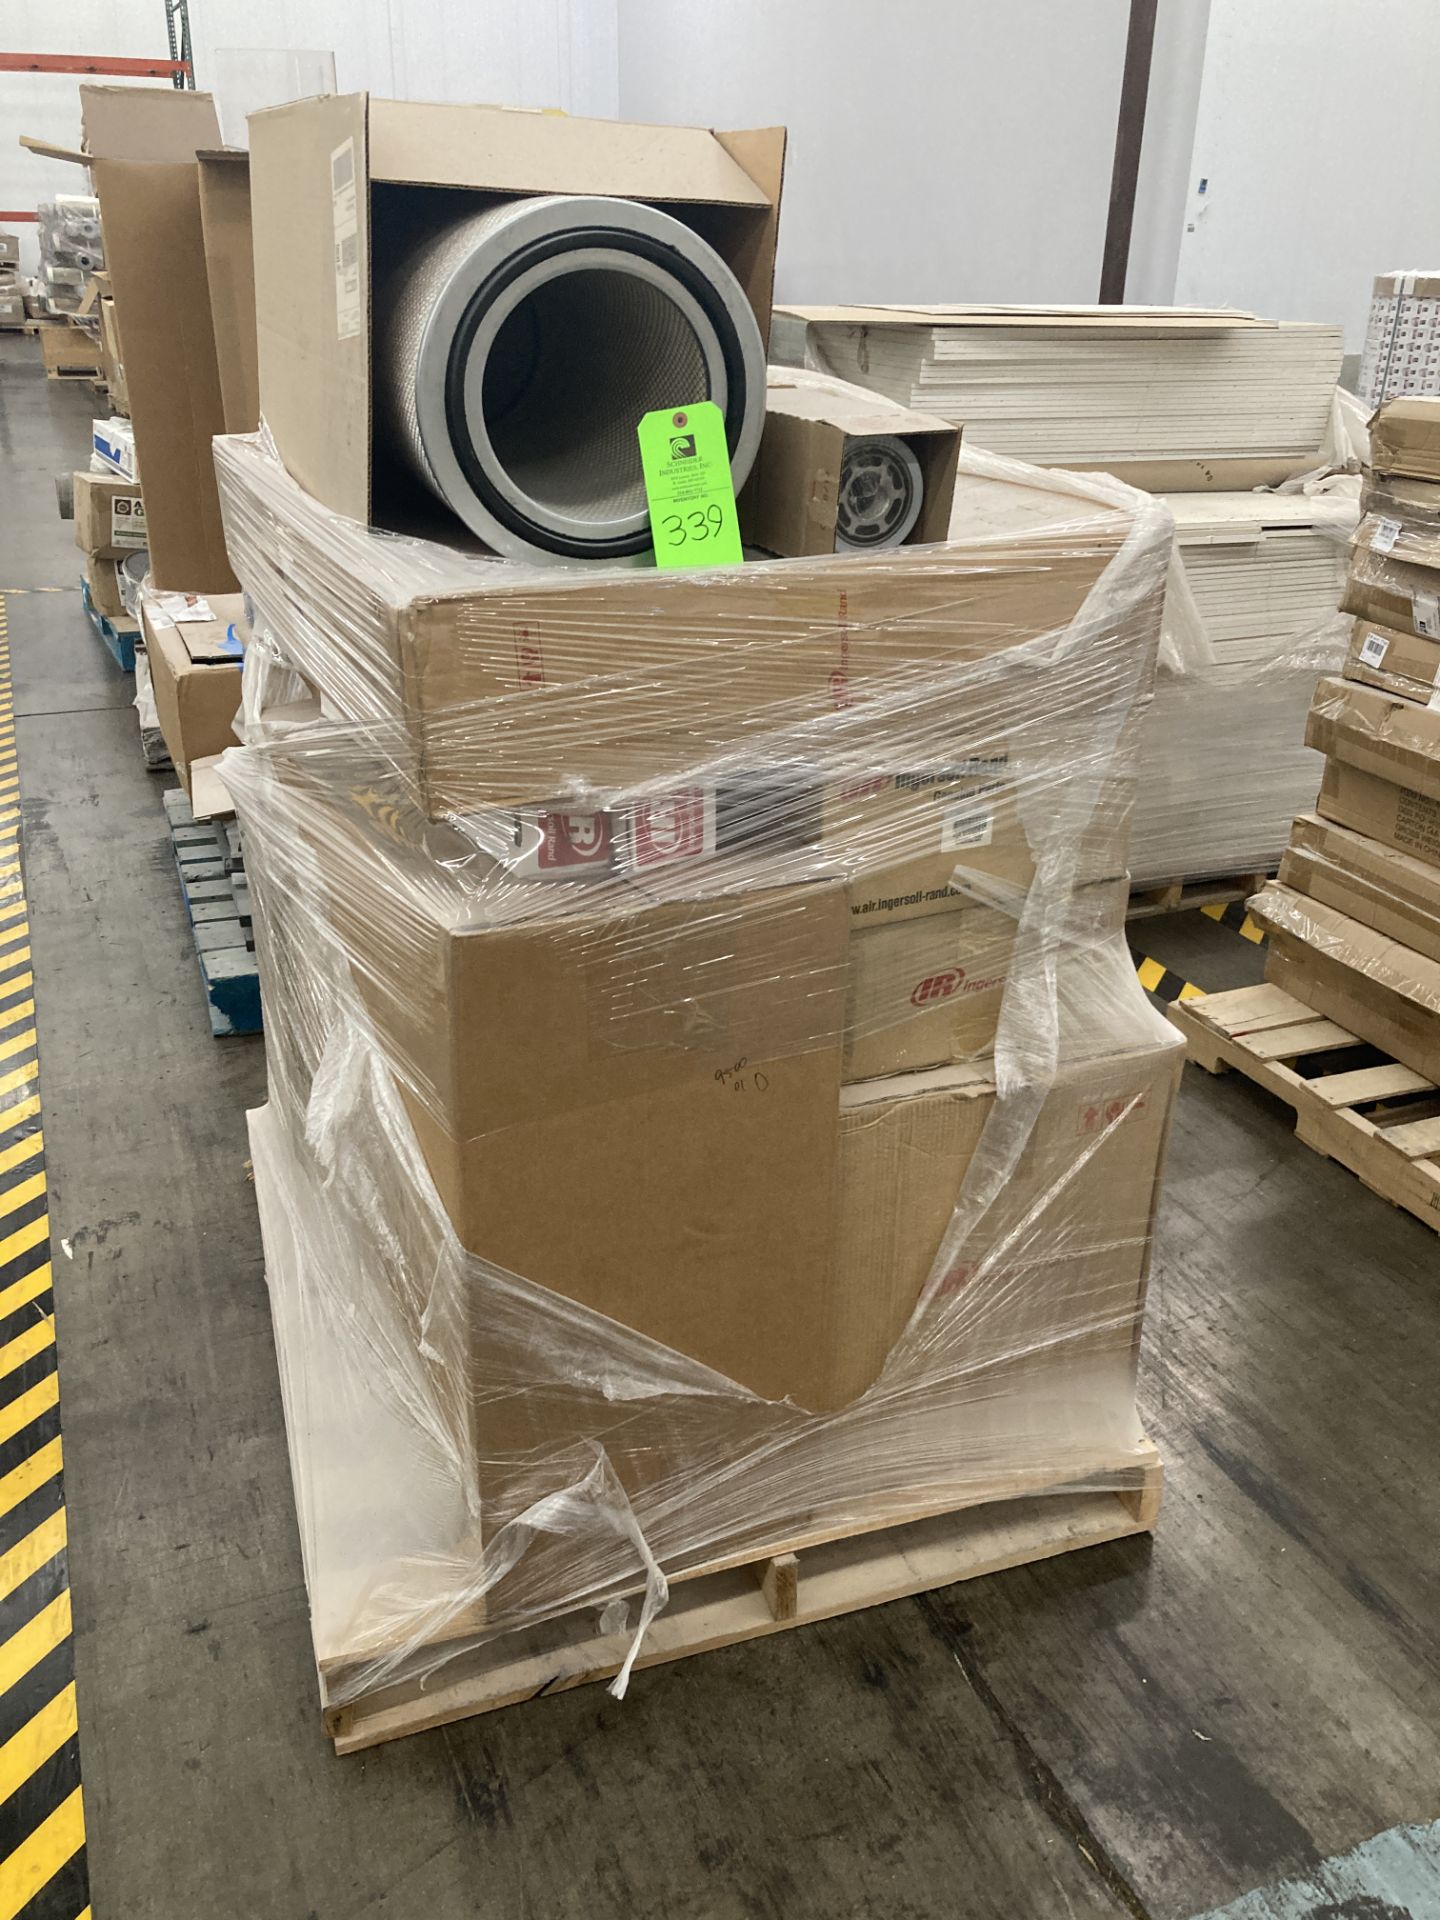 LOT OF pallet of filters Rigging Fee: $ 75